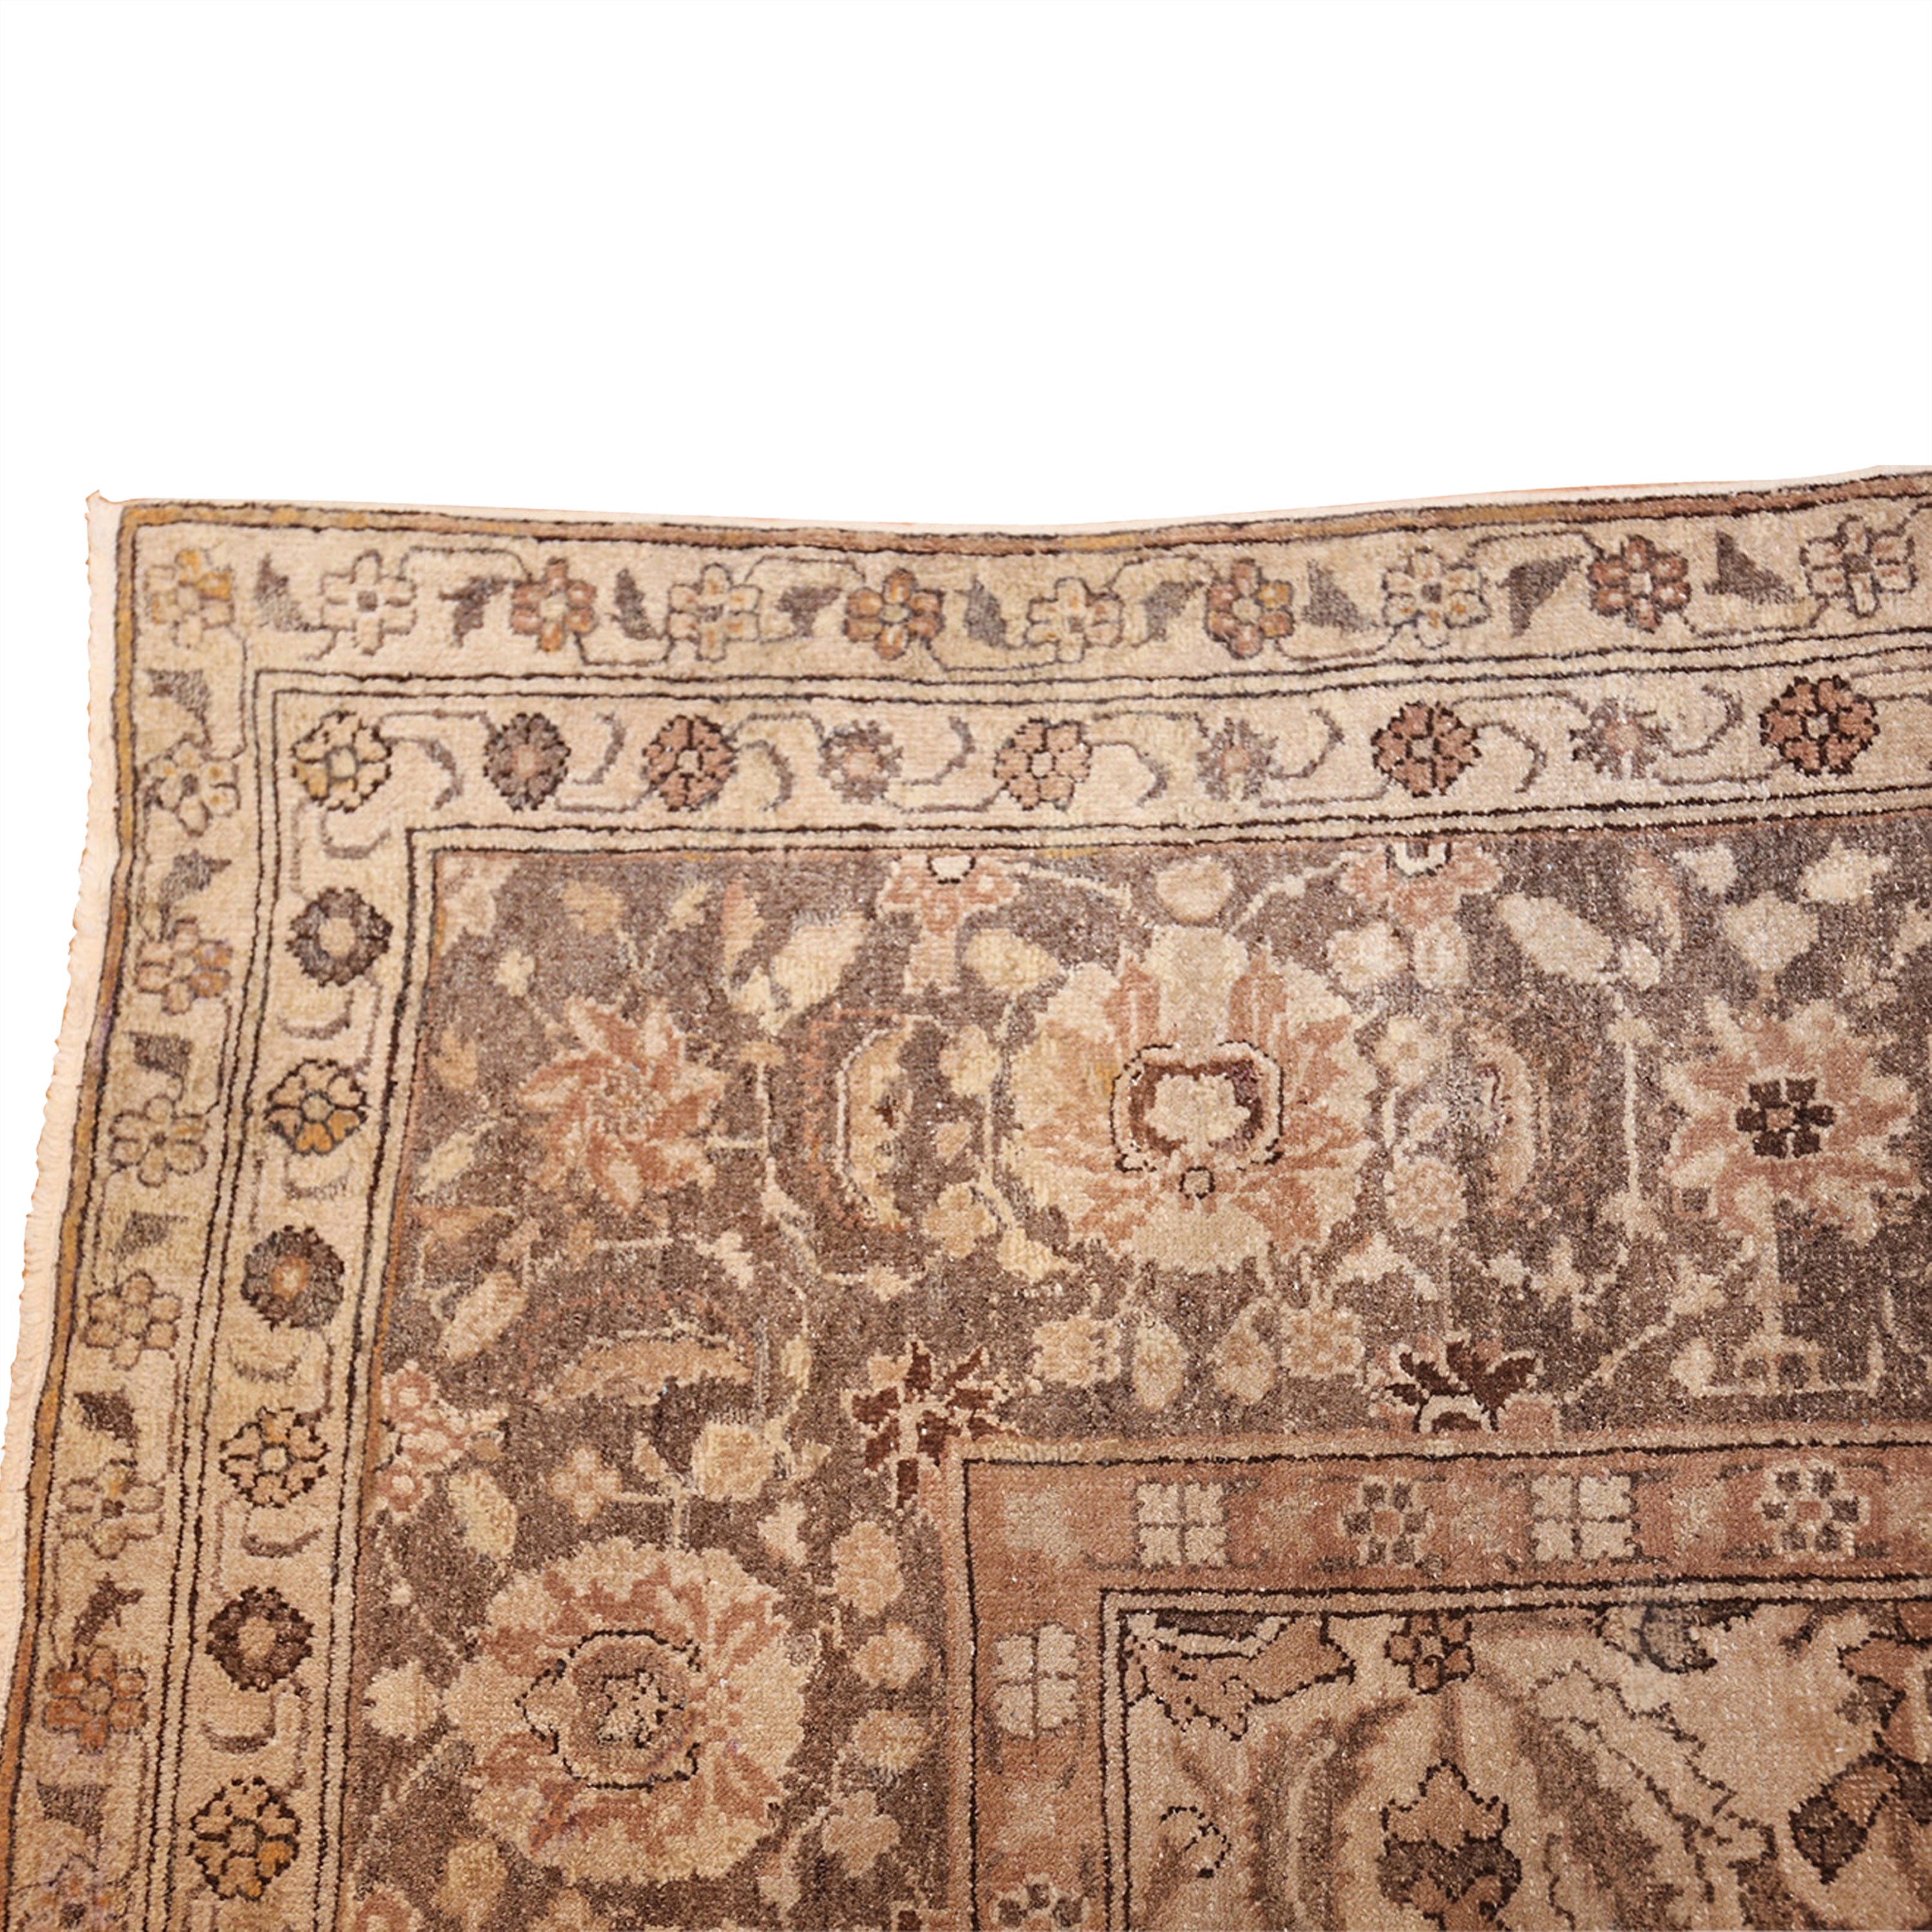 Brown Antique Traditional Indian Agra Rug - 10'3" x 10'5"